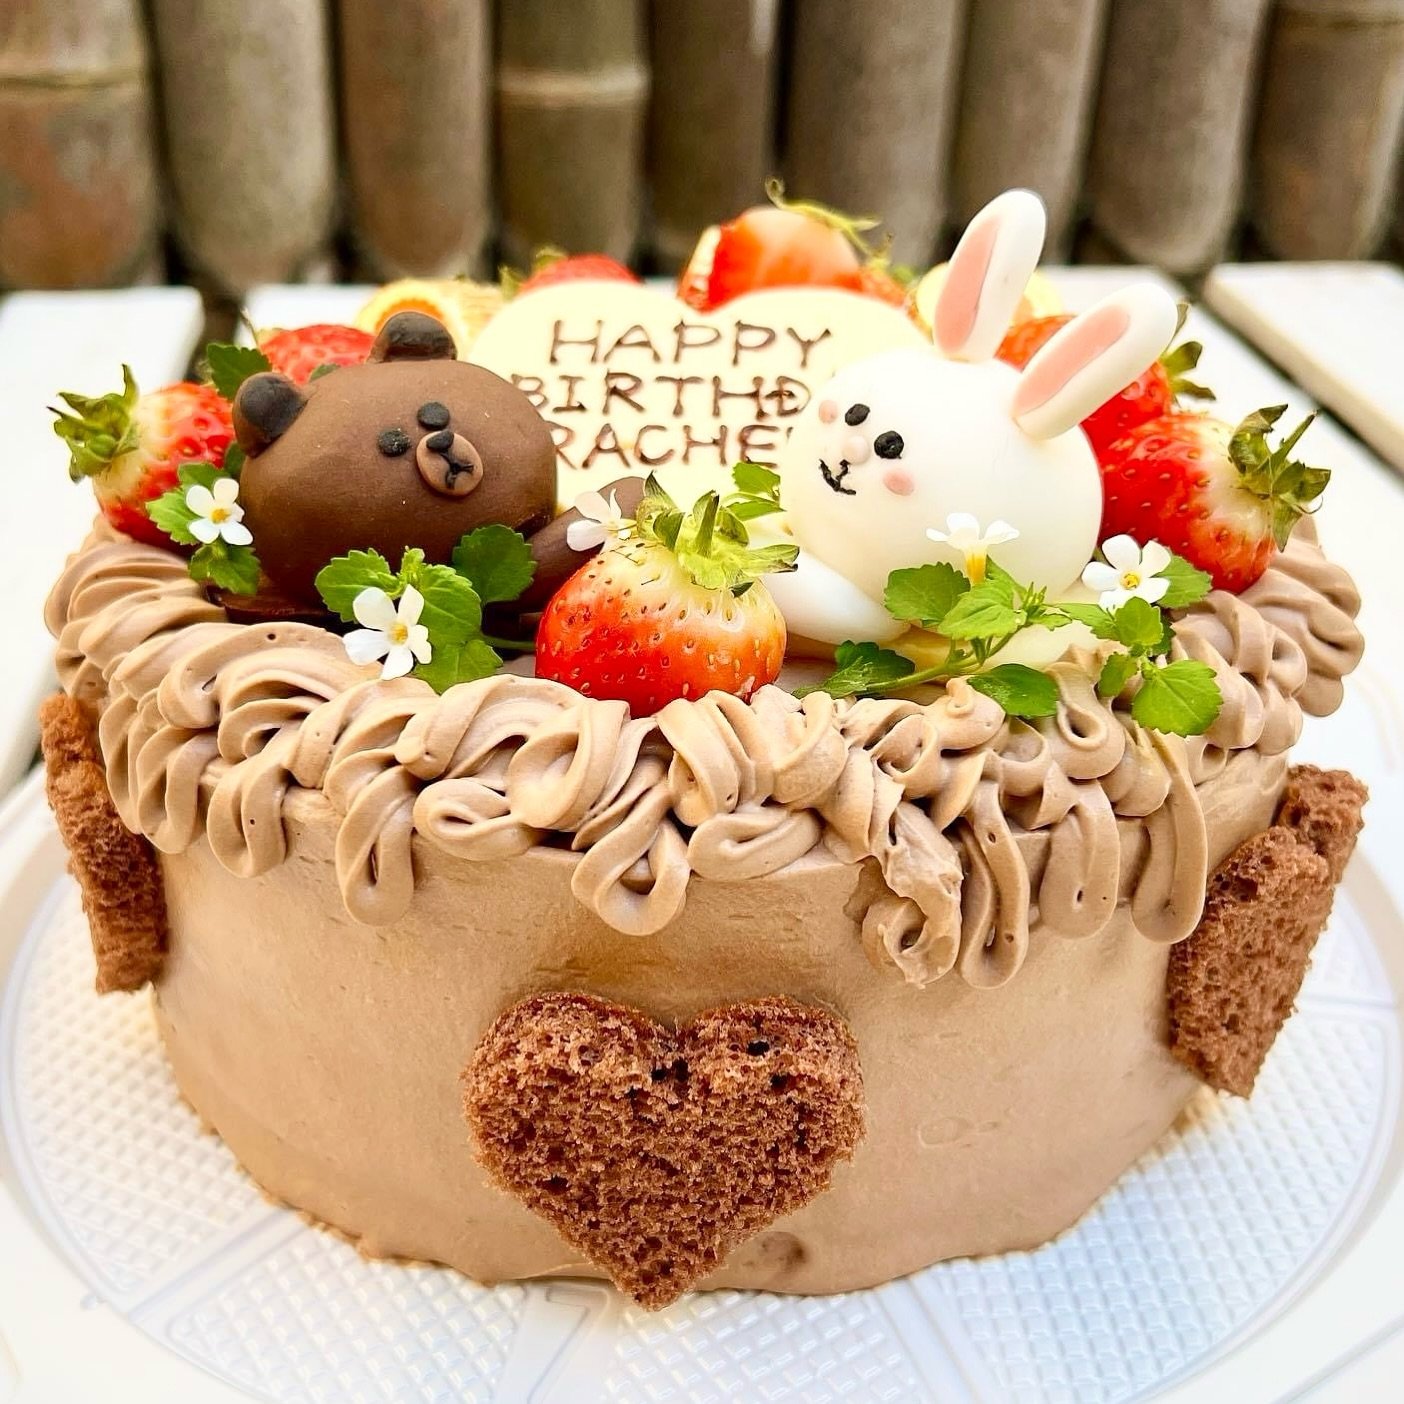 Calling all chocolate lovers ✨Our chocolate sponge cake with chocolate cream and strawberries 🐻 🐰

#necco #neccolondon #exmouthmarket #islingtonrestaurants #londonfood #londonfoodie #londoneats #everylastmouthful #londoncakes